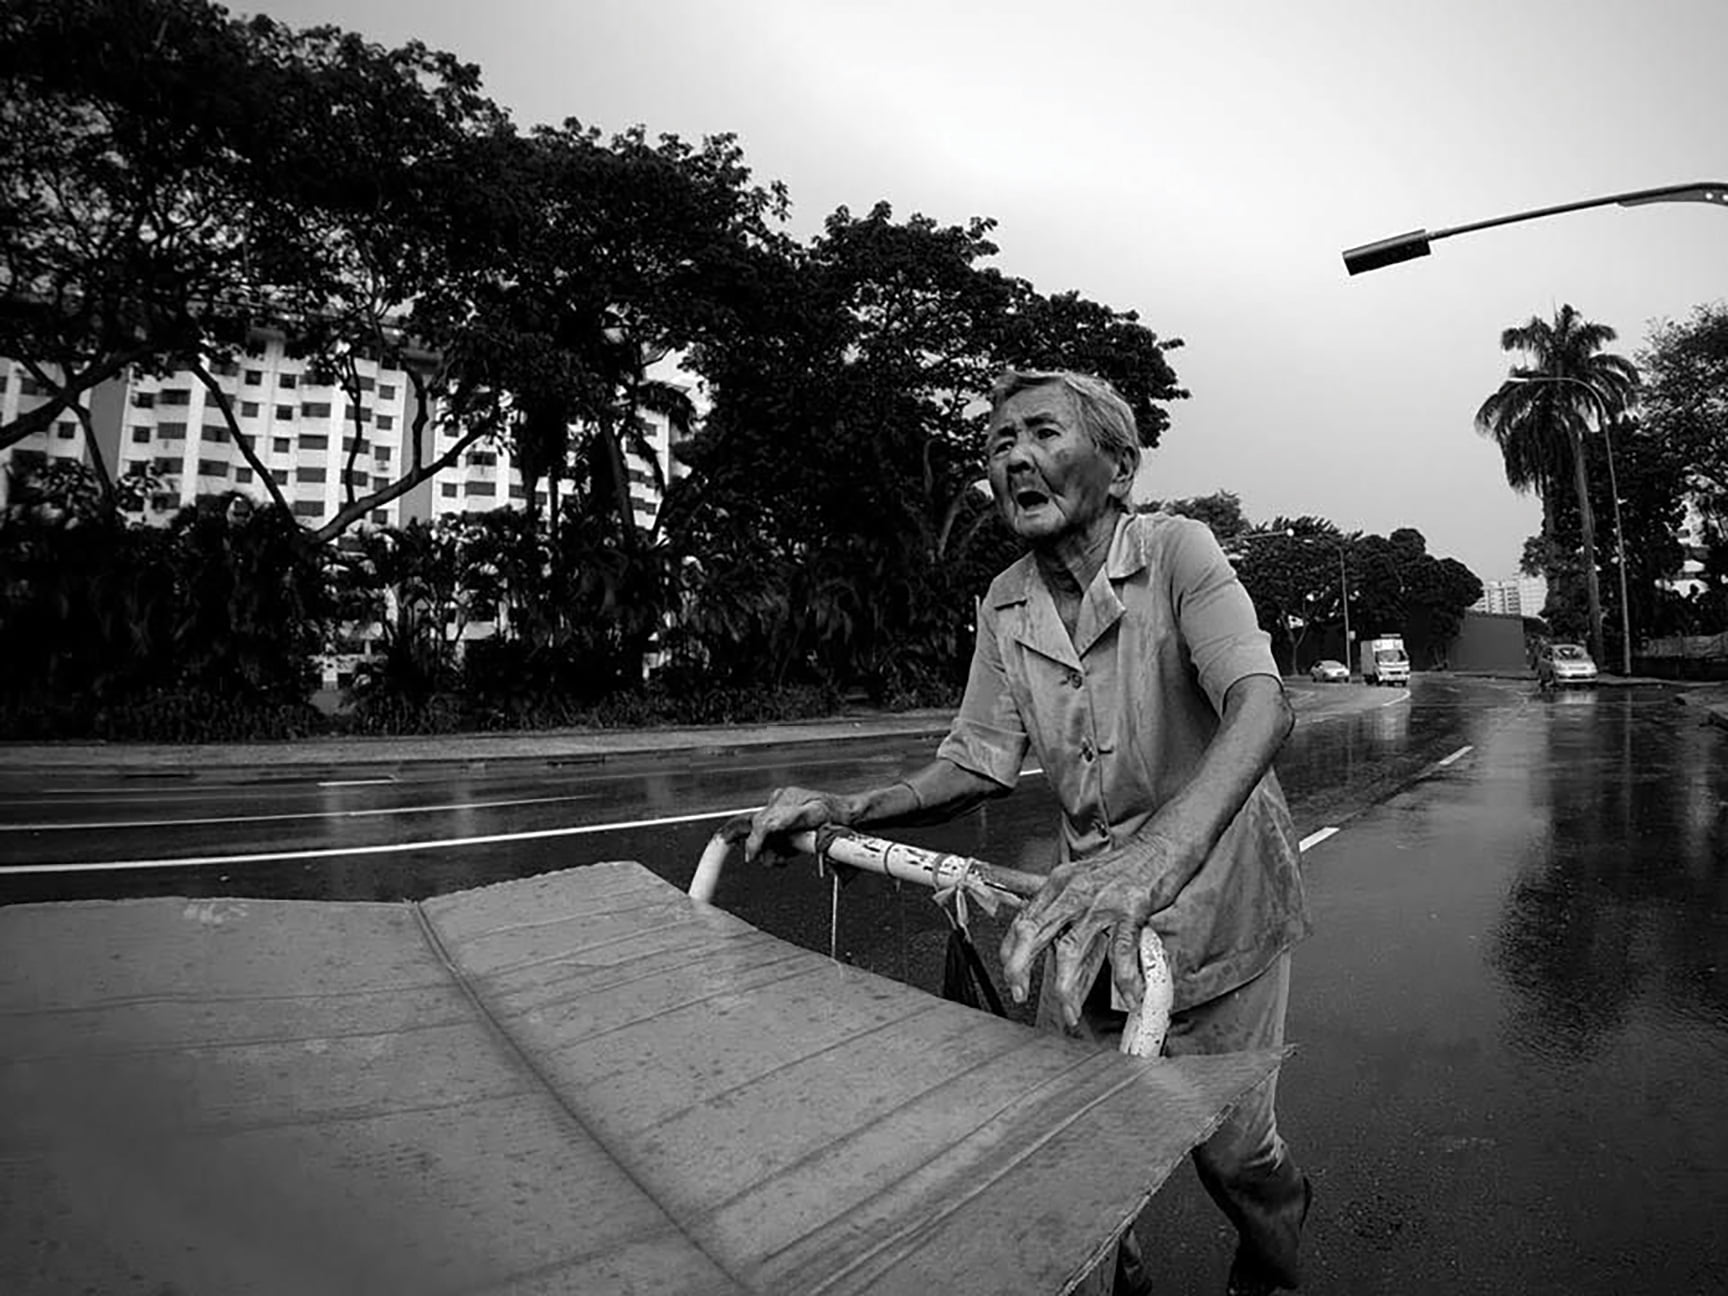 Happy-People-Helping-People-Black-and-white-cardboard-collector-pushing-trolley